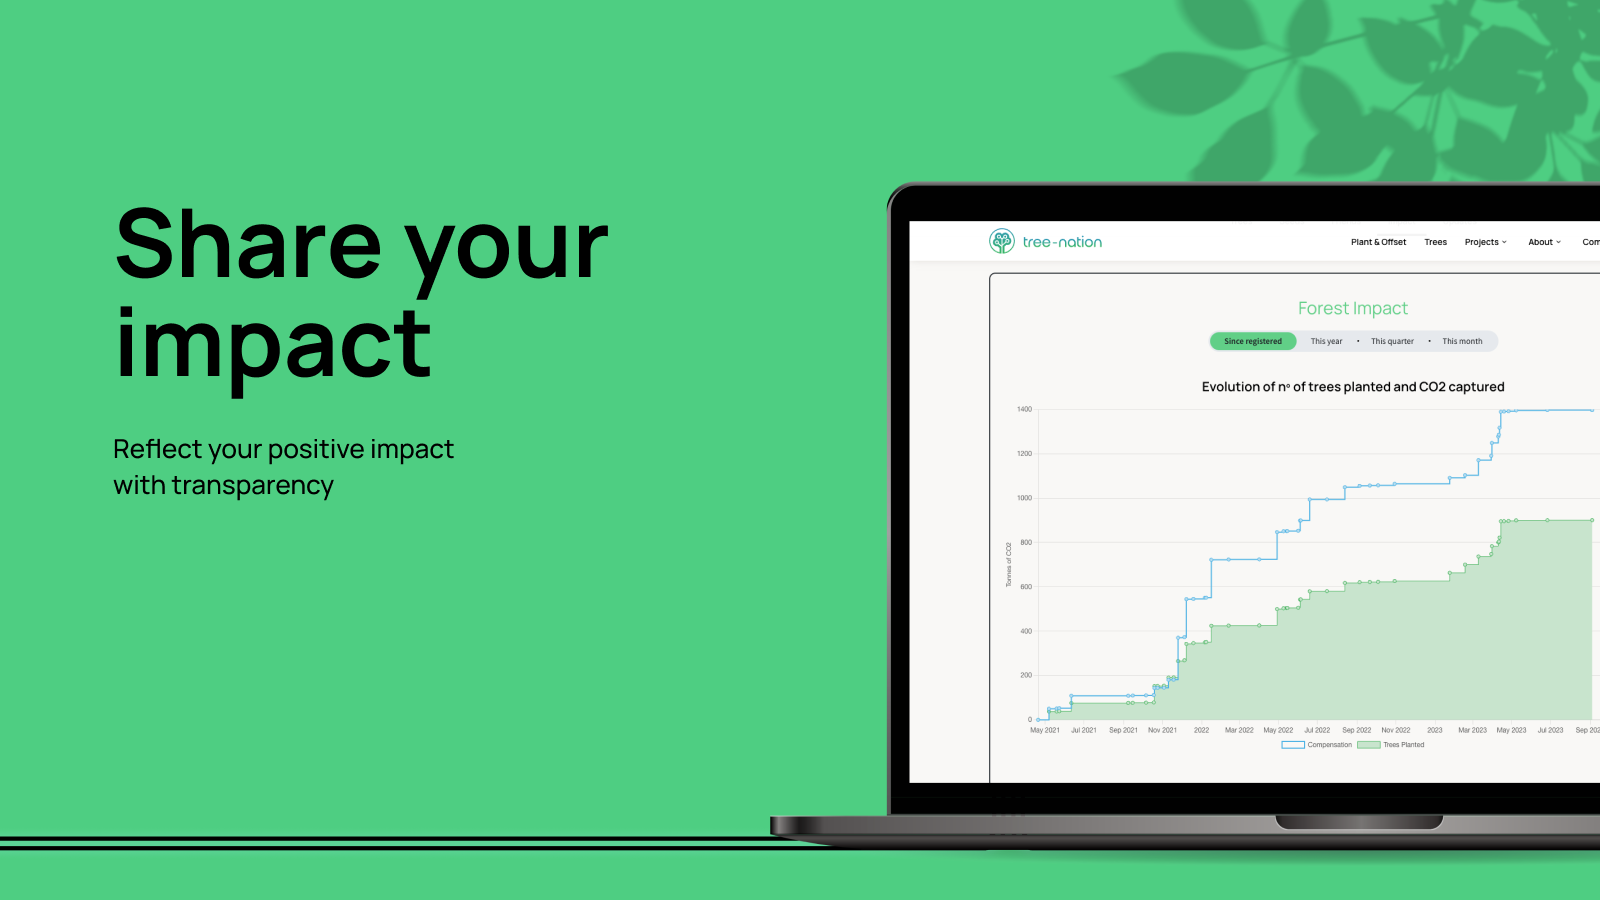 Share your impact